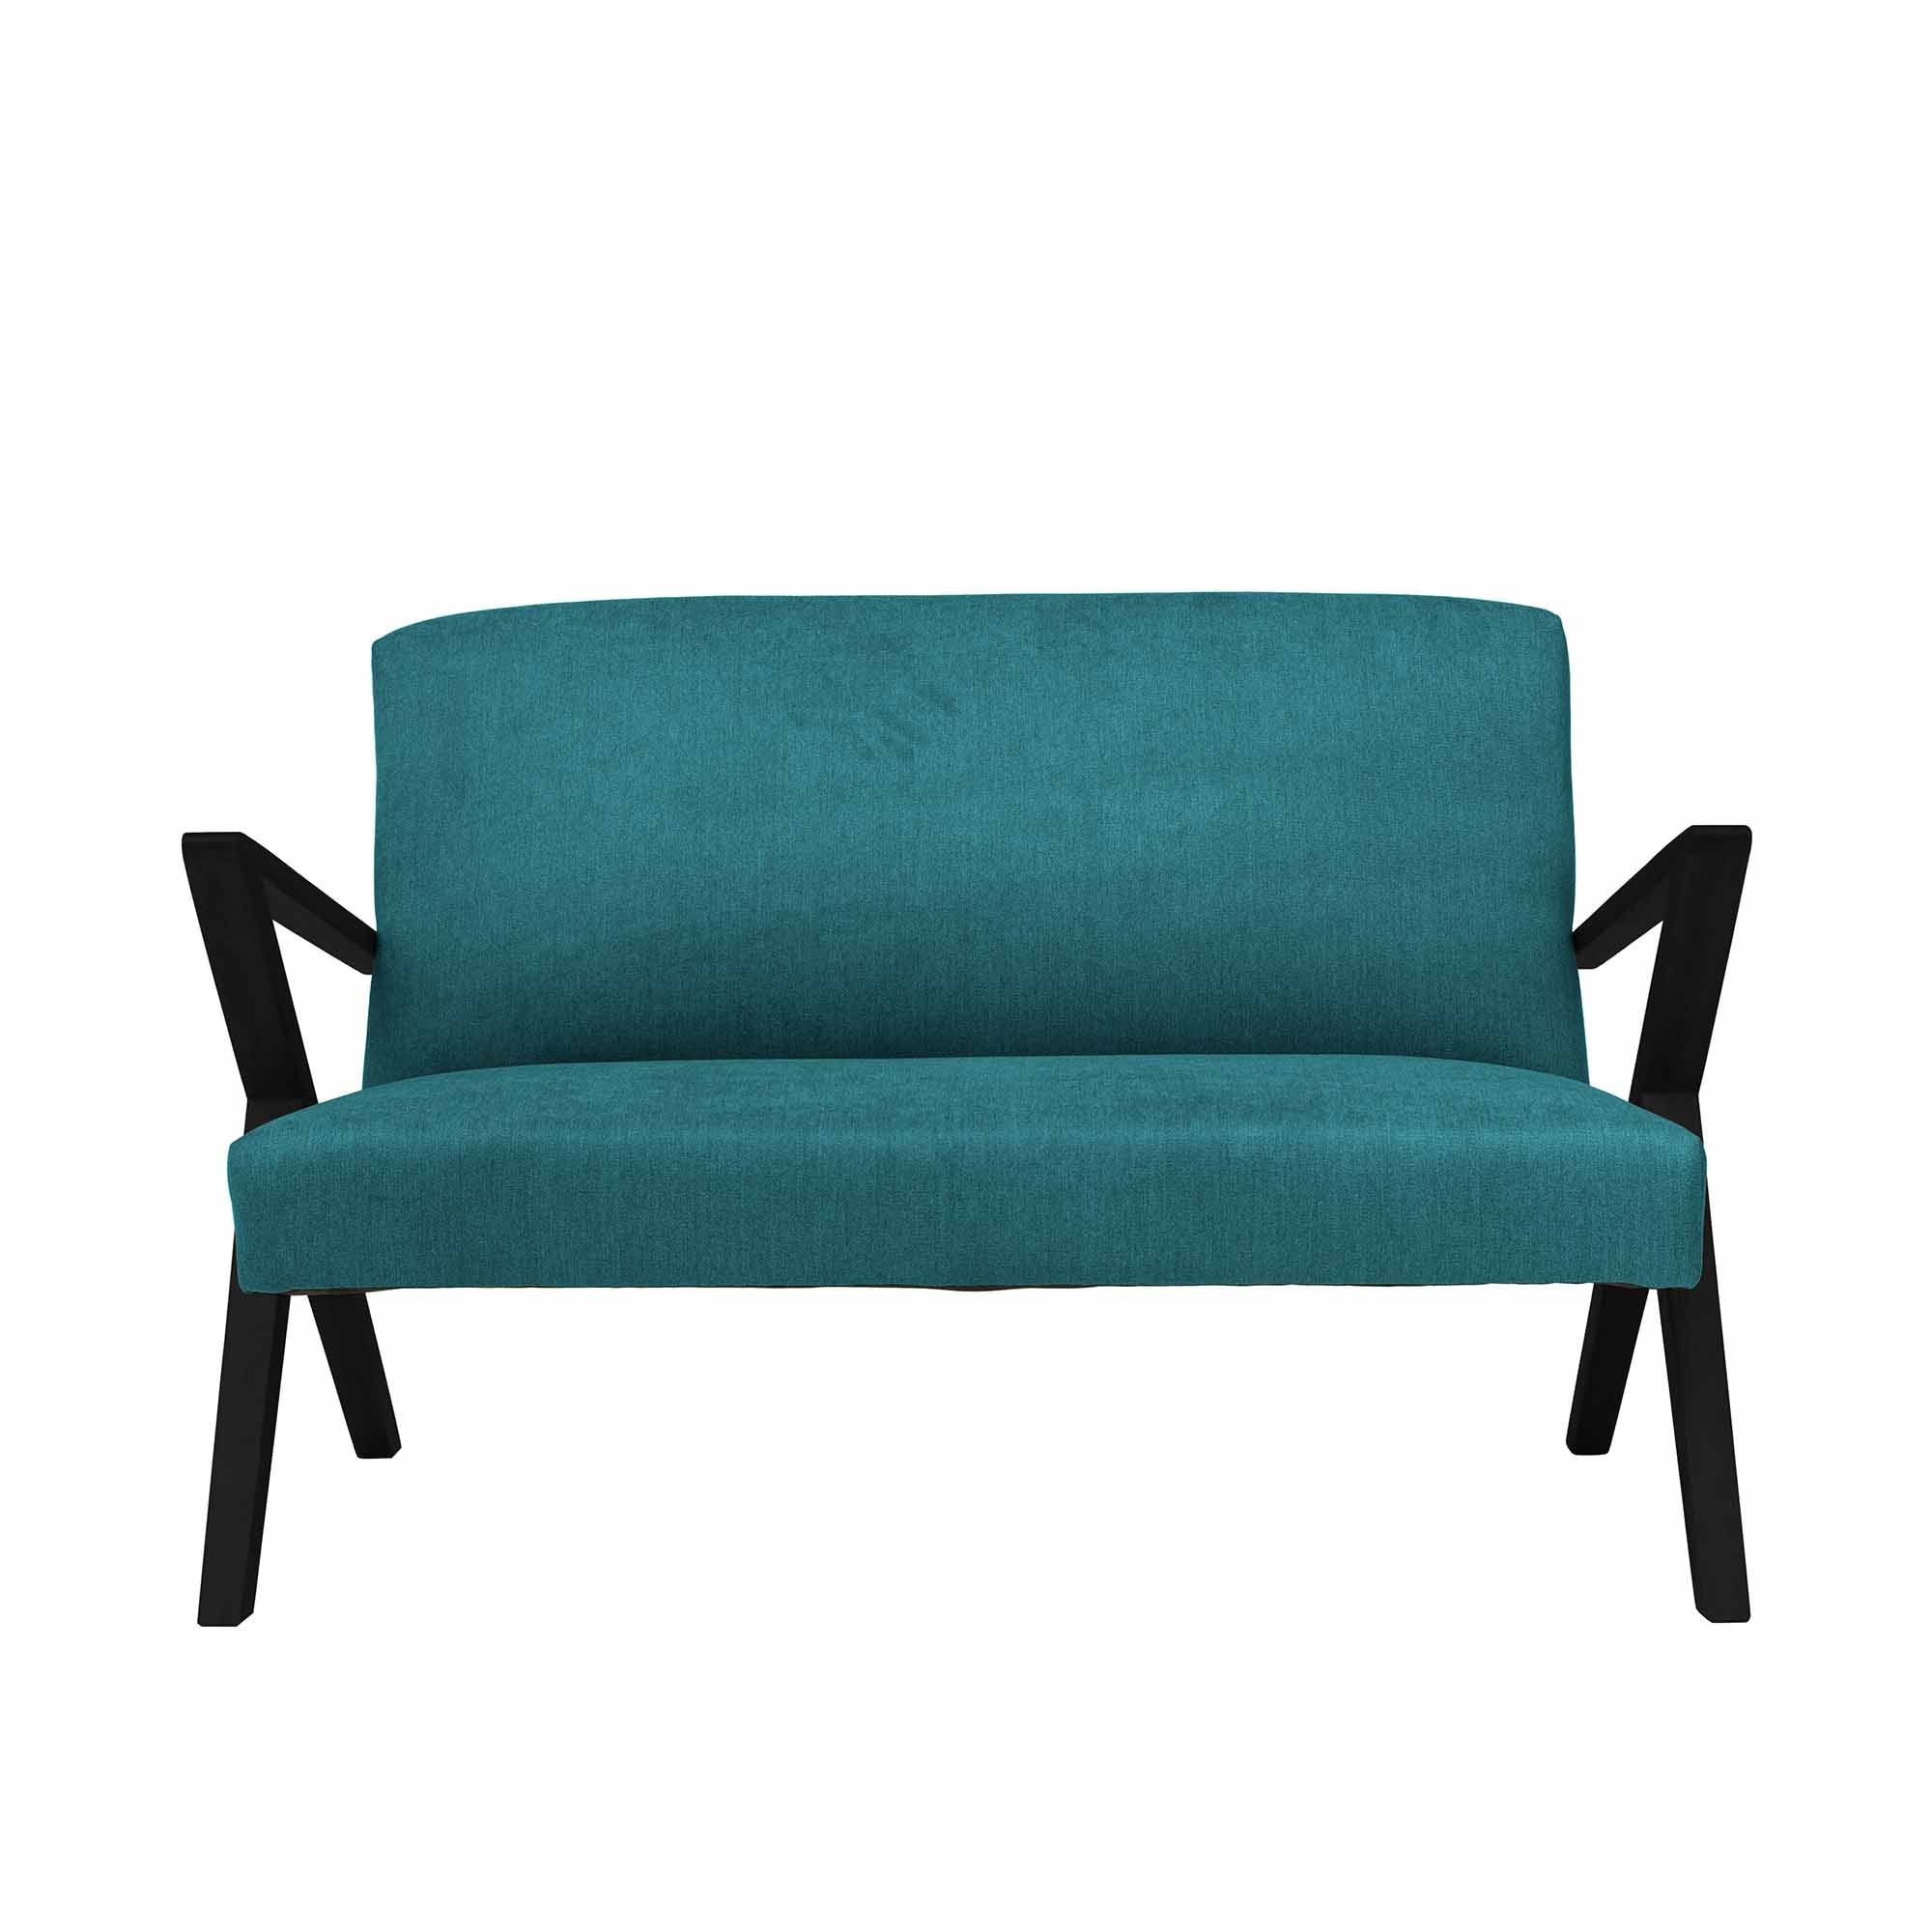 2-Seater Sofa, Beech Wood Frame, Black Lacquered blue fabric, front view